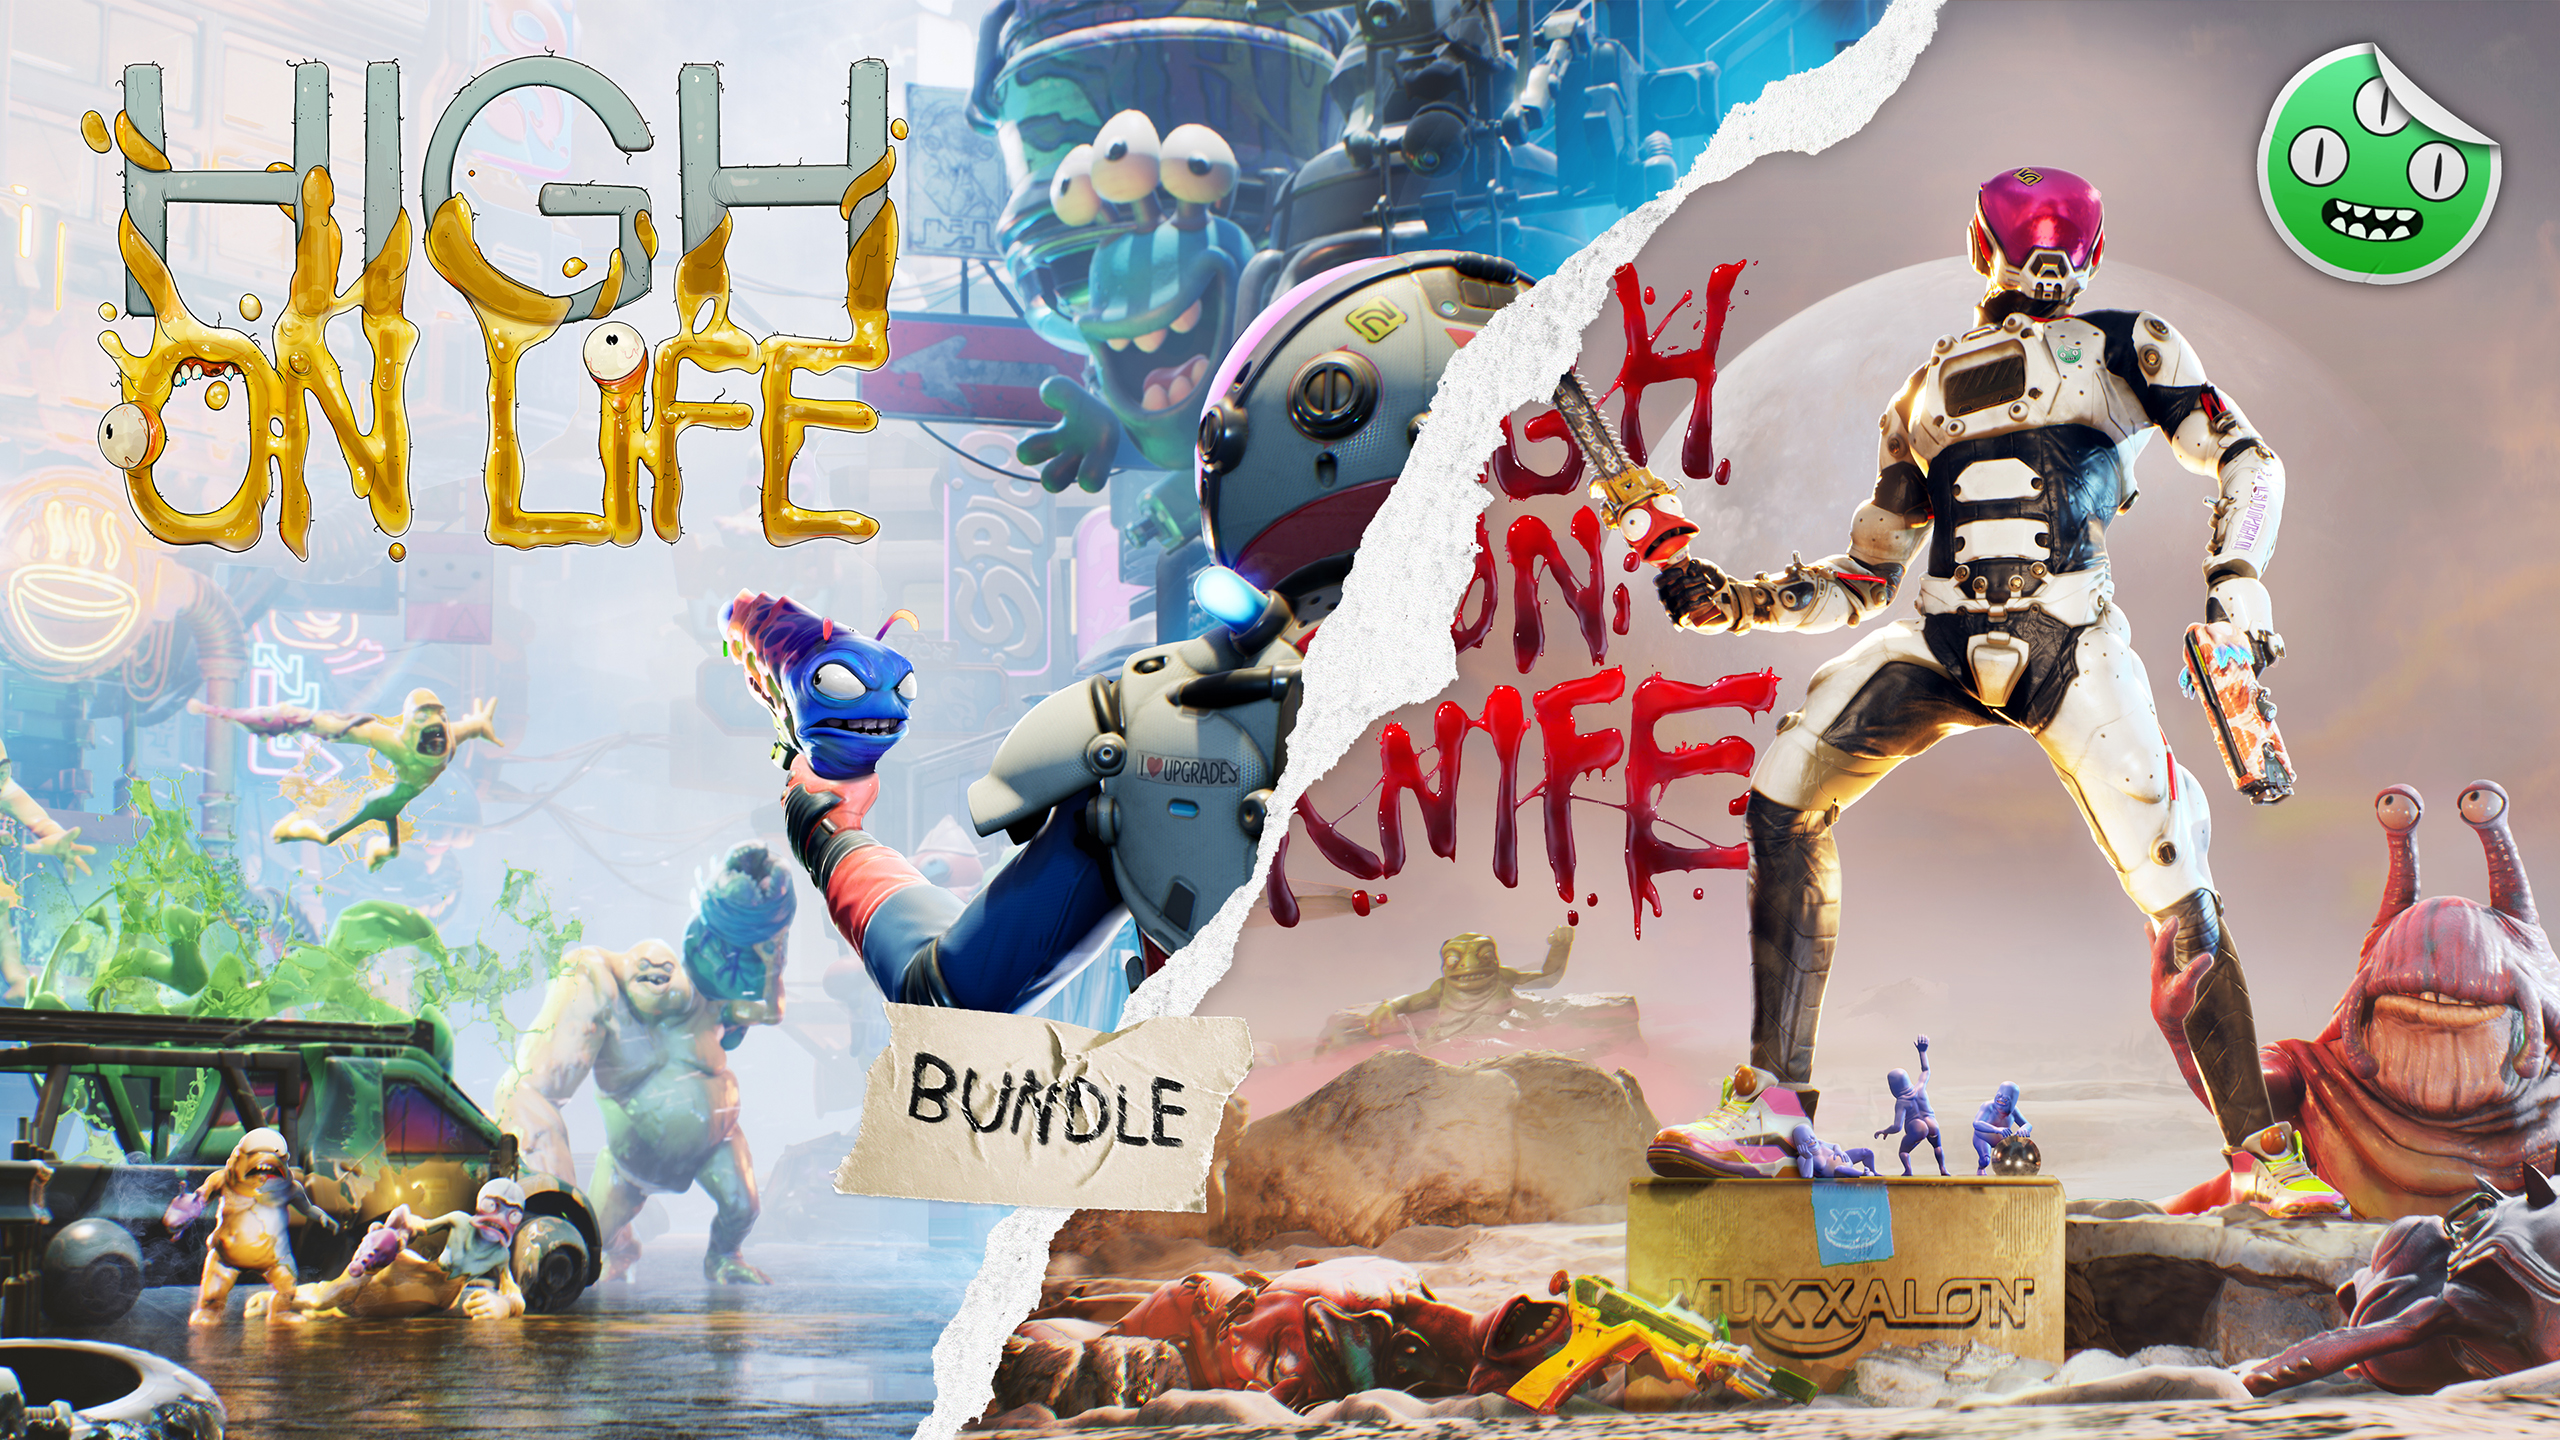 High on Life: High on Knife DLC - 9 Minutes of Exclusive Gameplay